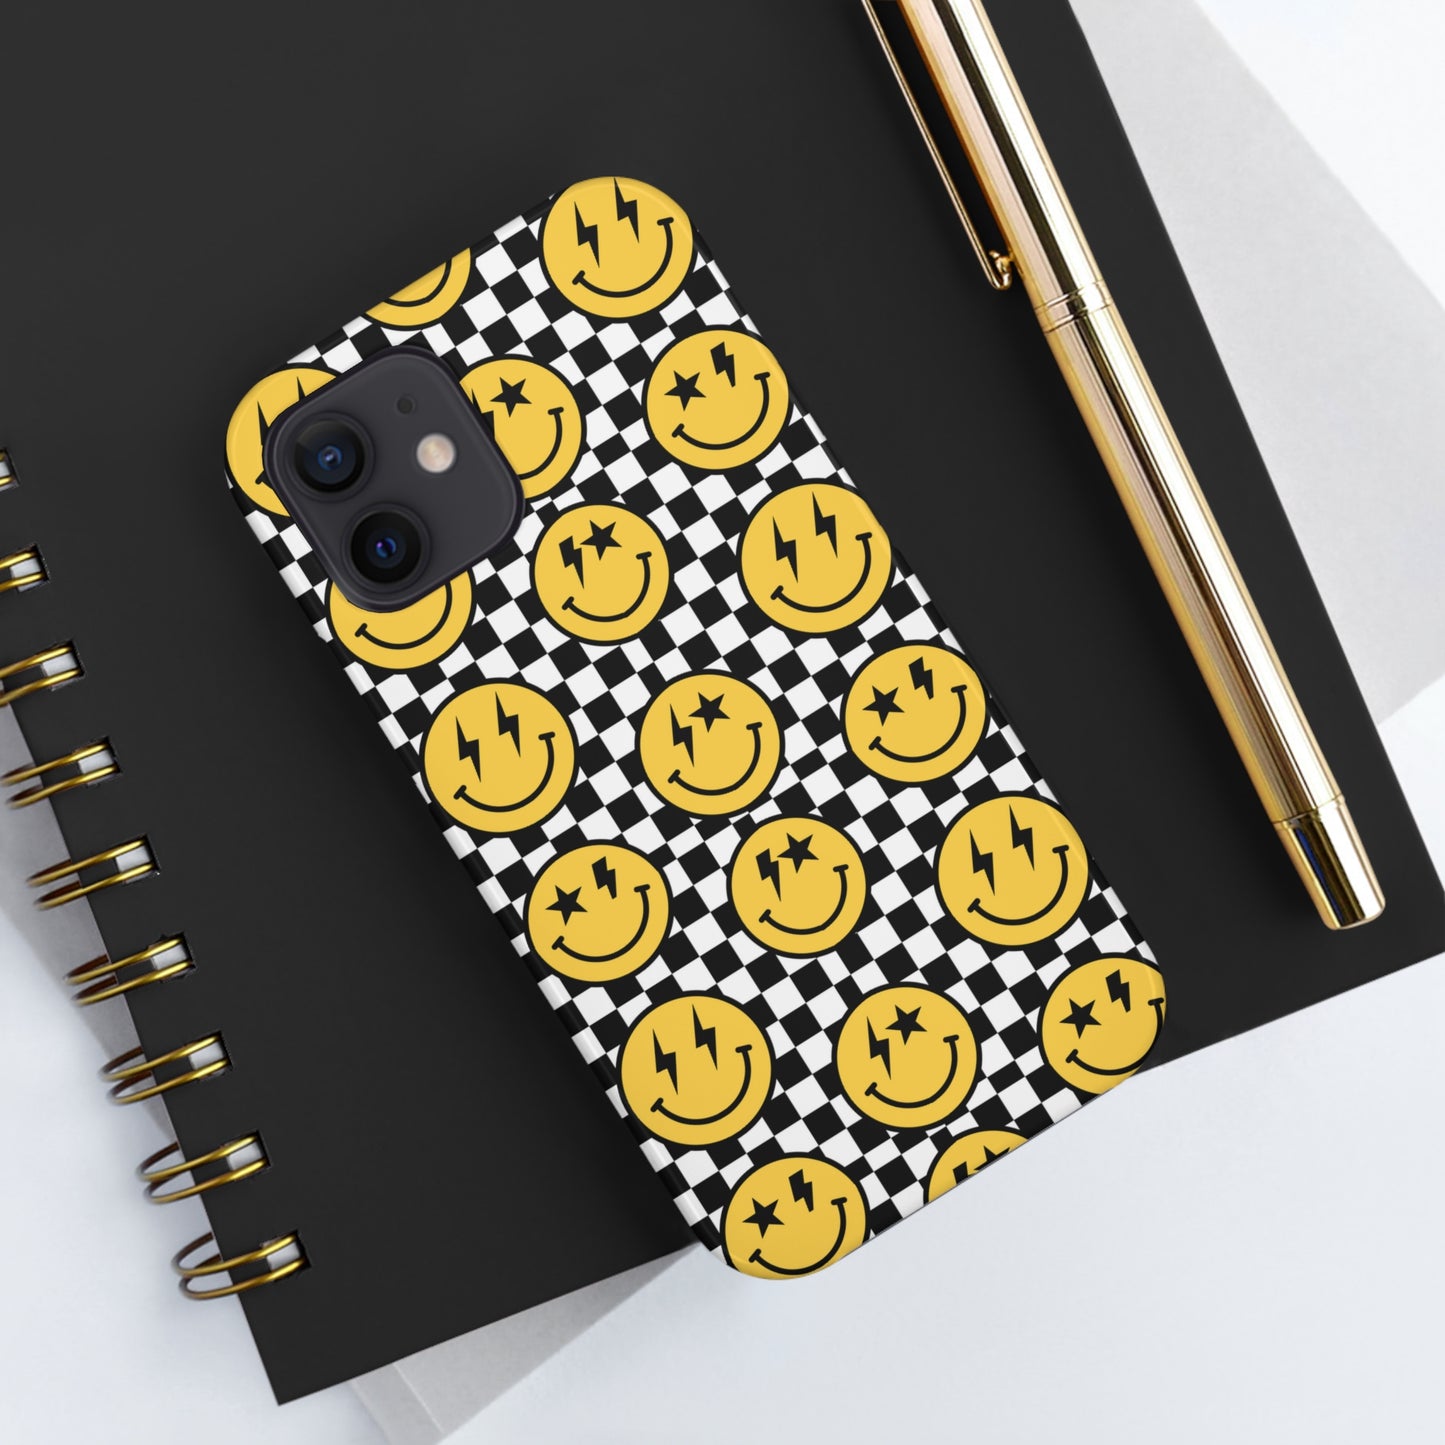 Black And White Checkered Flag Happy Face Tough Phone Cases